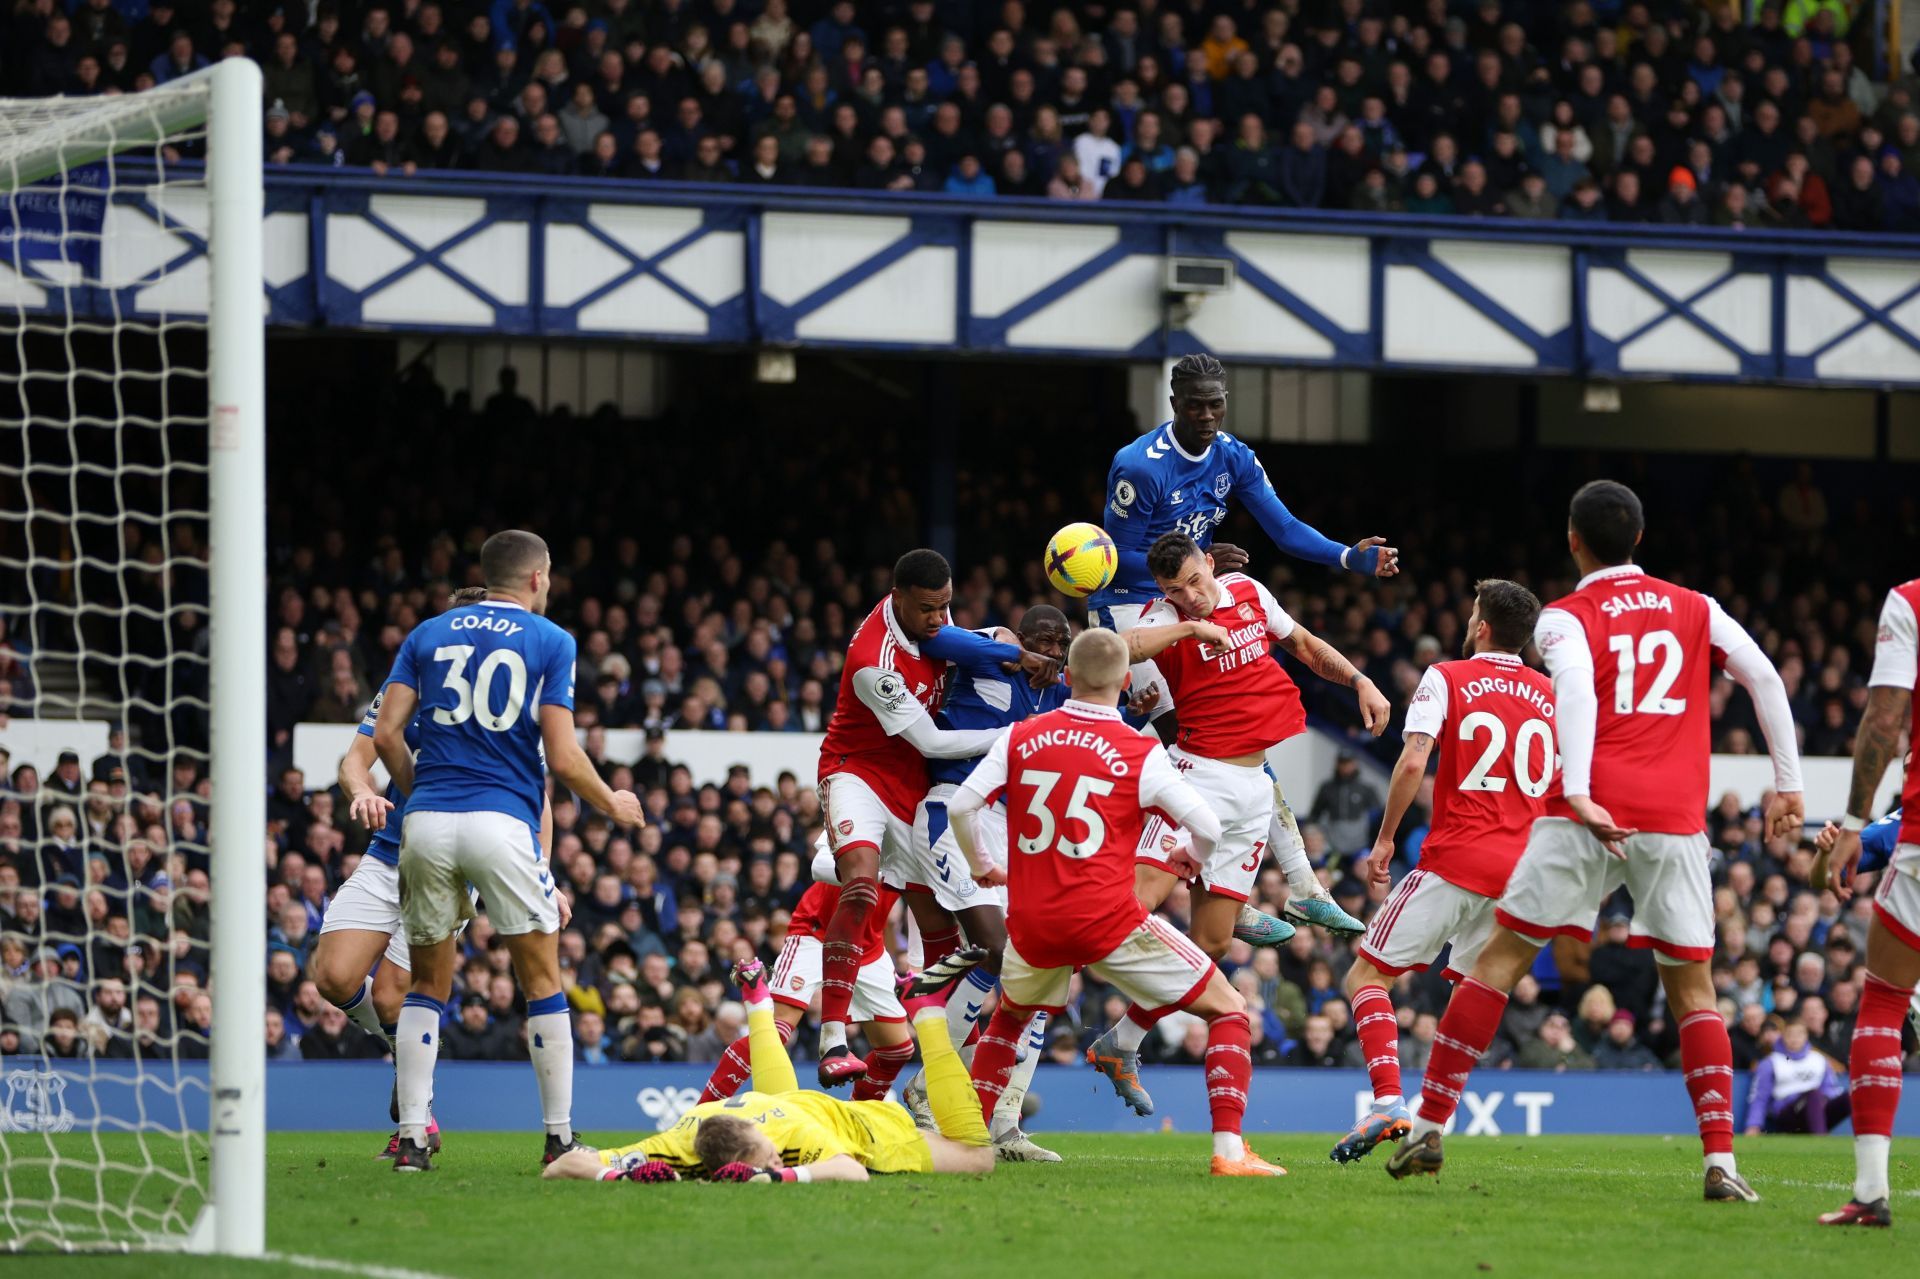 Everton recorded a shock victory over Arsenal in the Premier League.